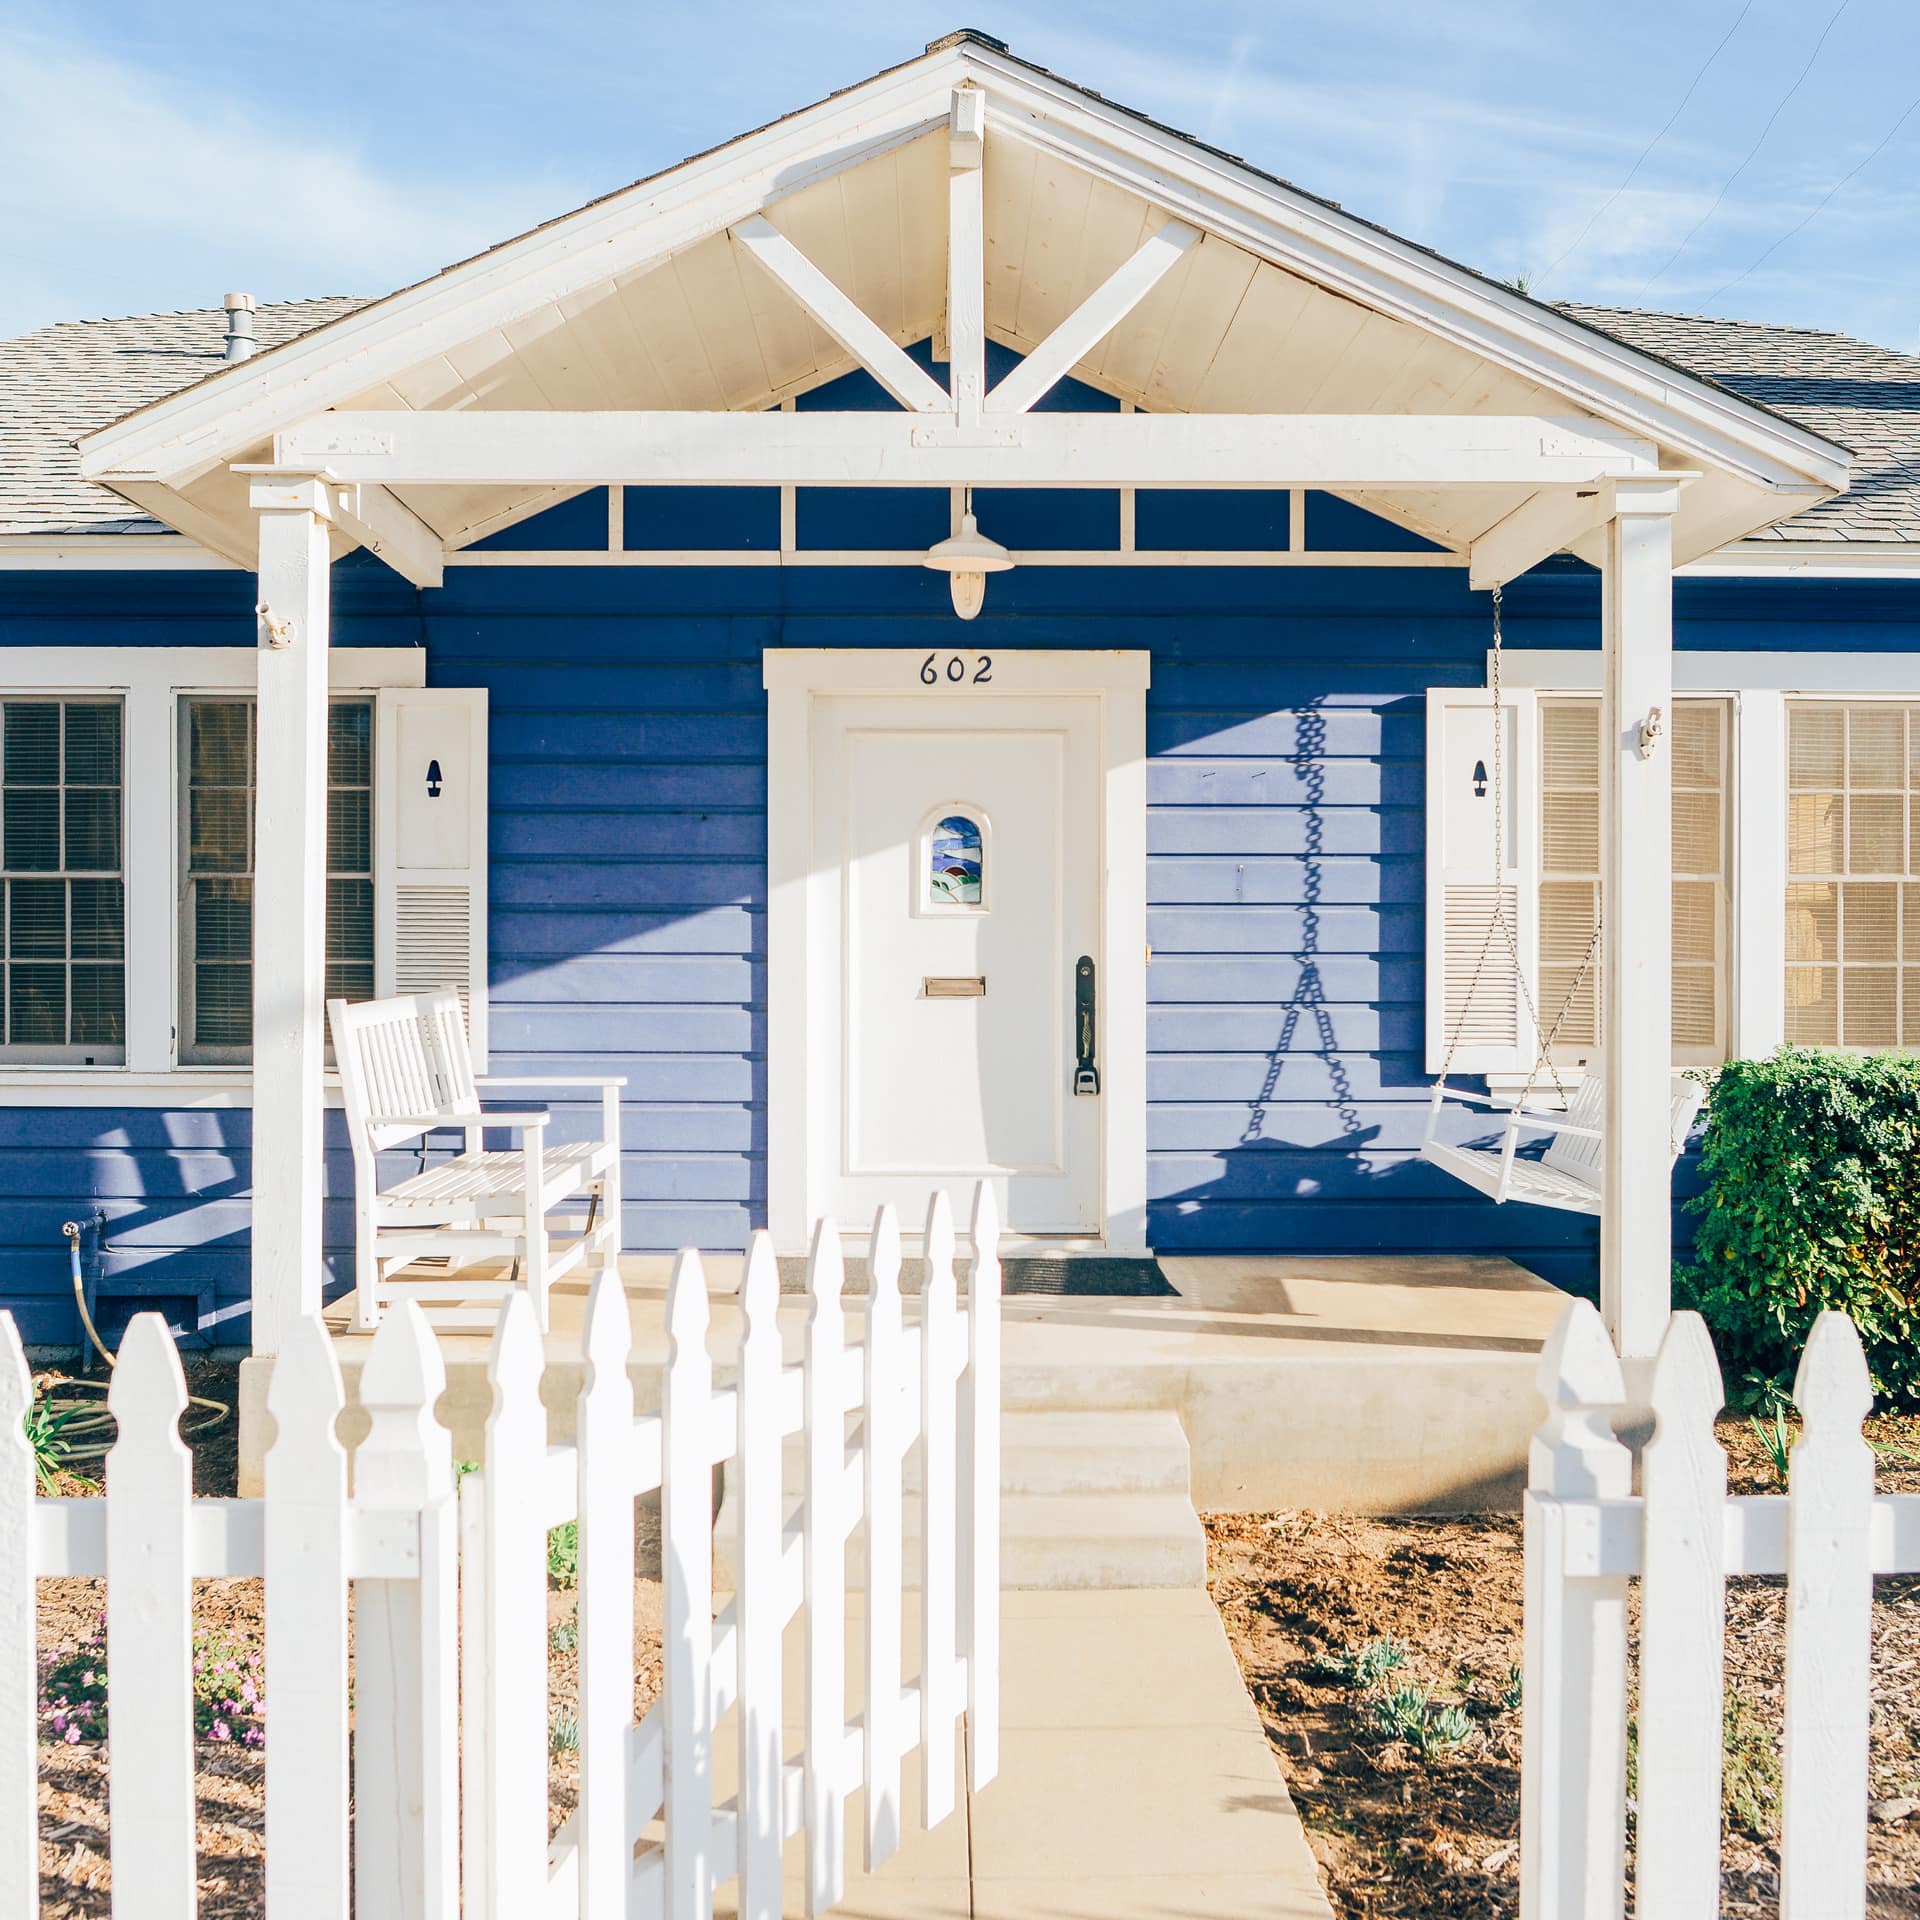 A cute cottage with blue-painted walls and white picket fences